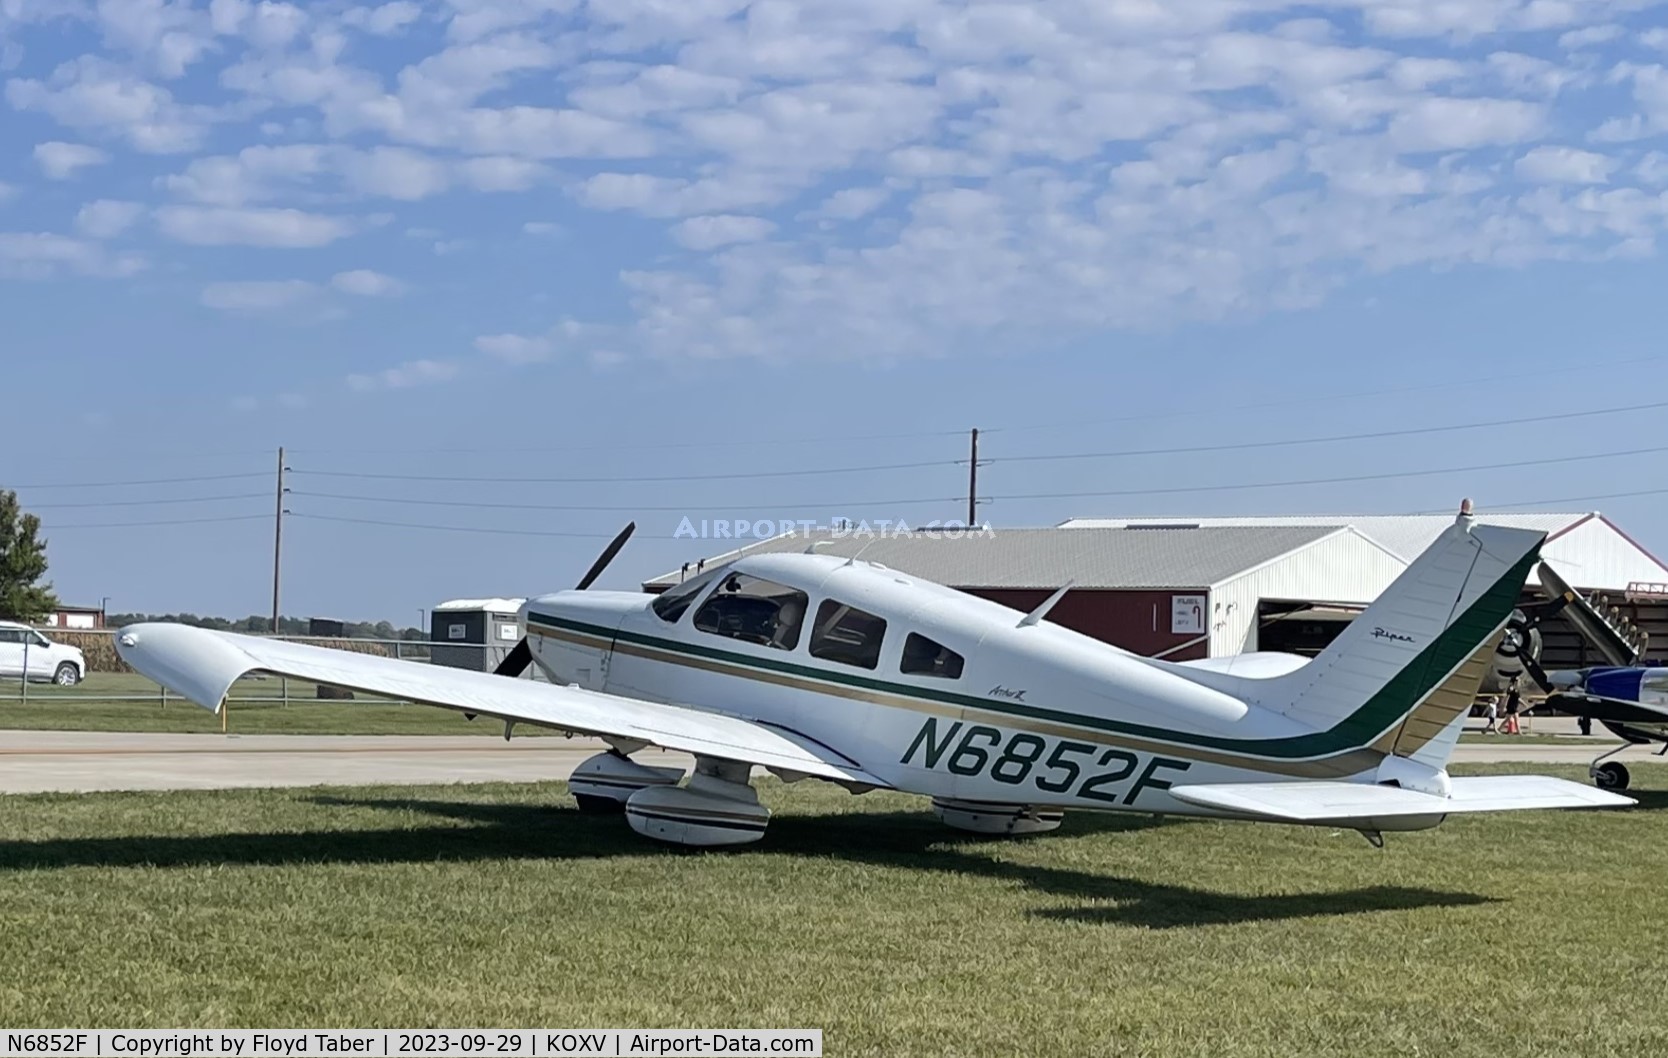 N6852F, 1976 Piper PA-28-181 C/N 28-7790167, Fly Iowa 2023 Knoxville Iowa